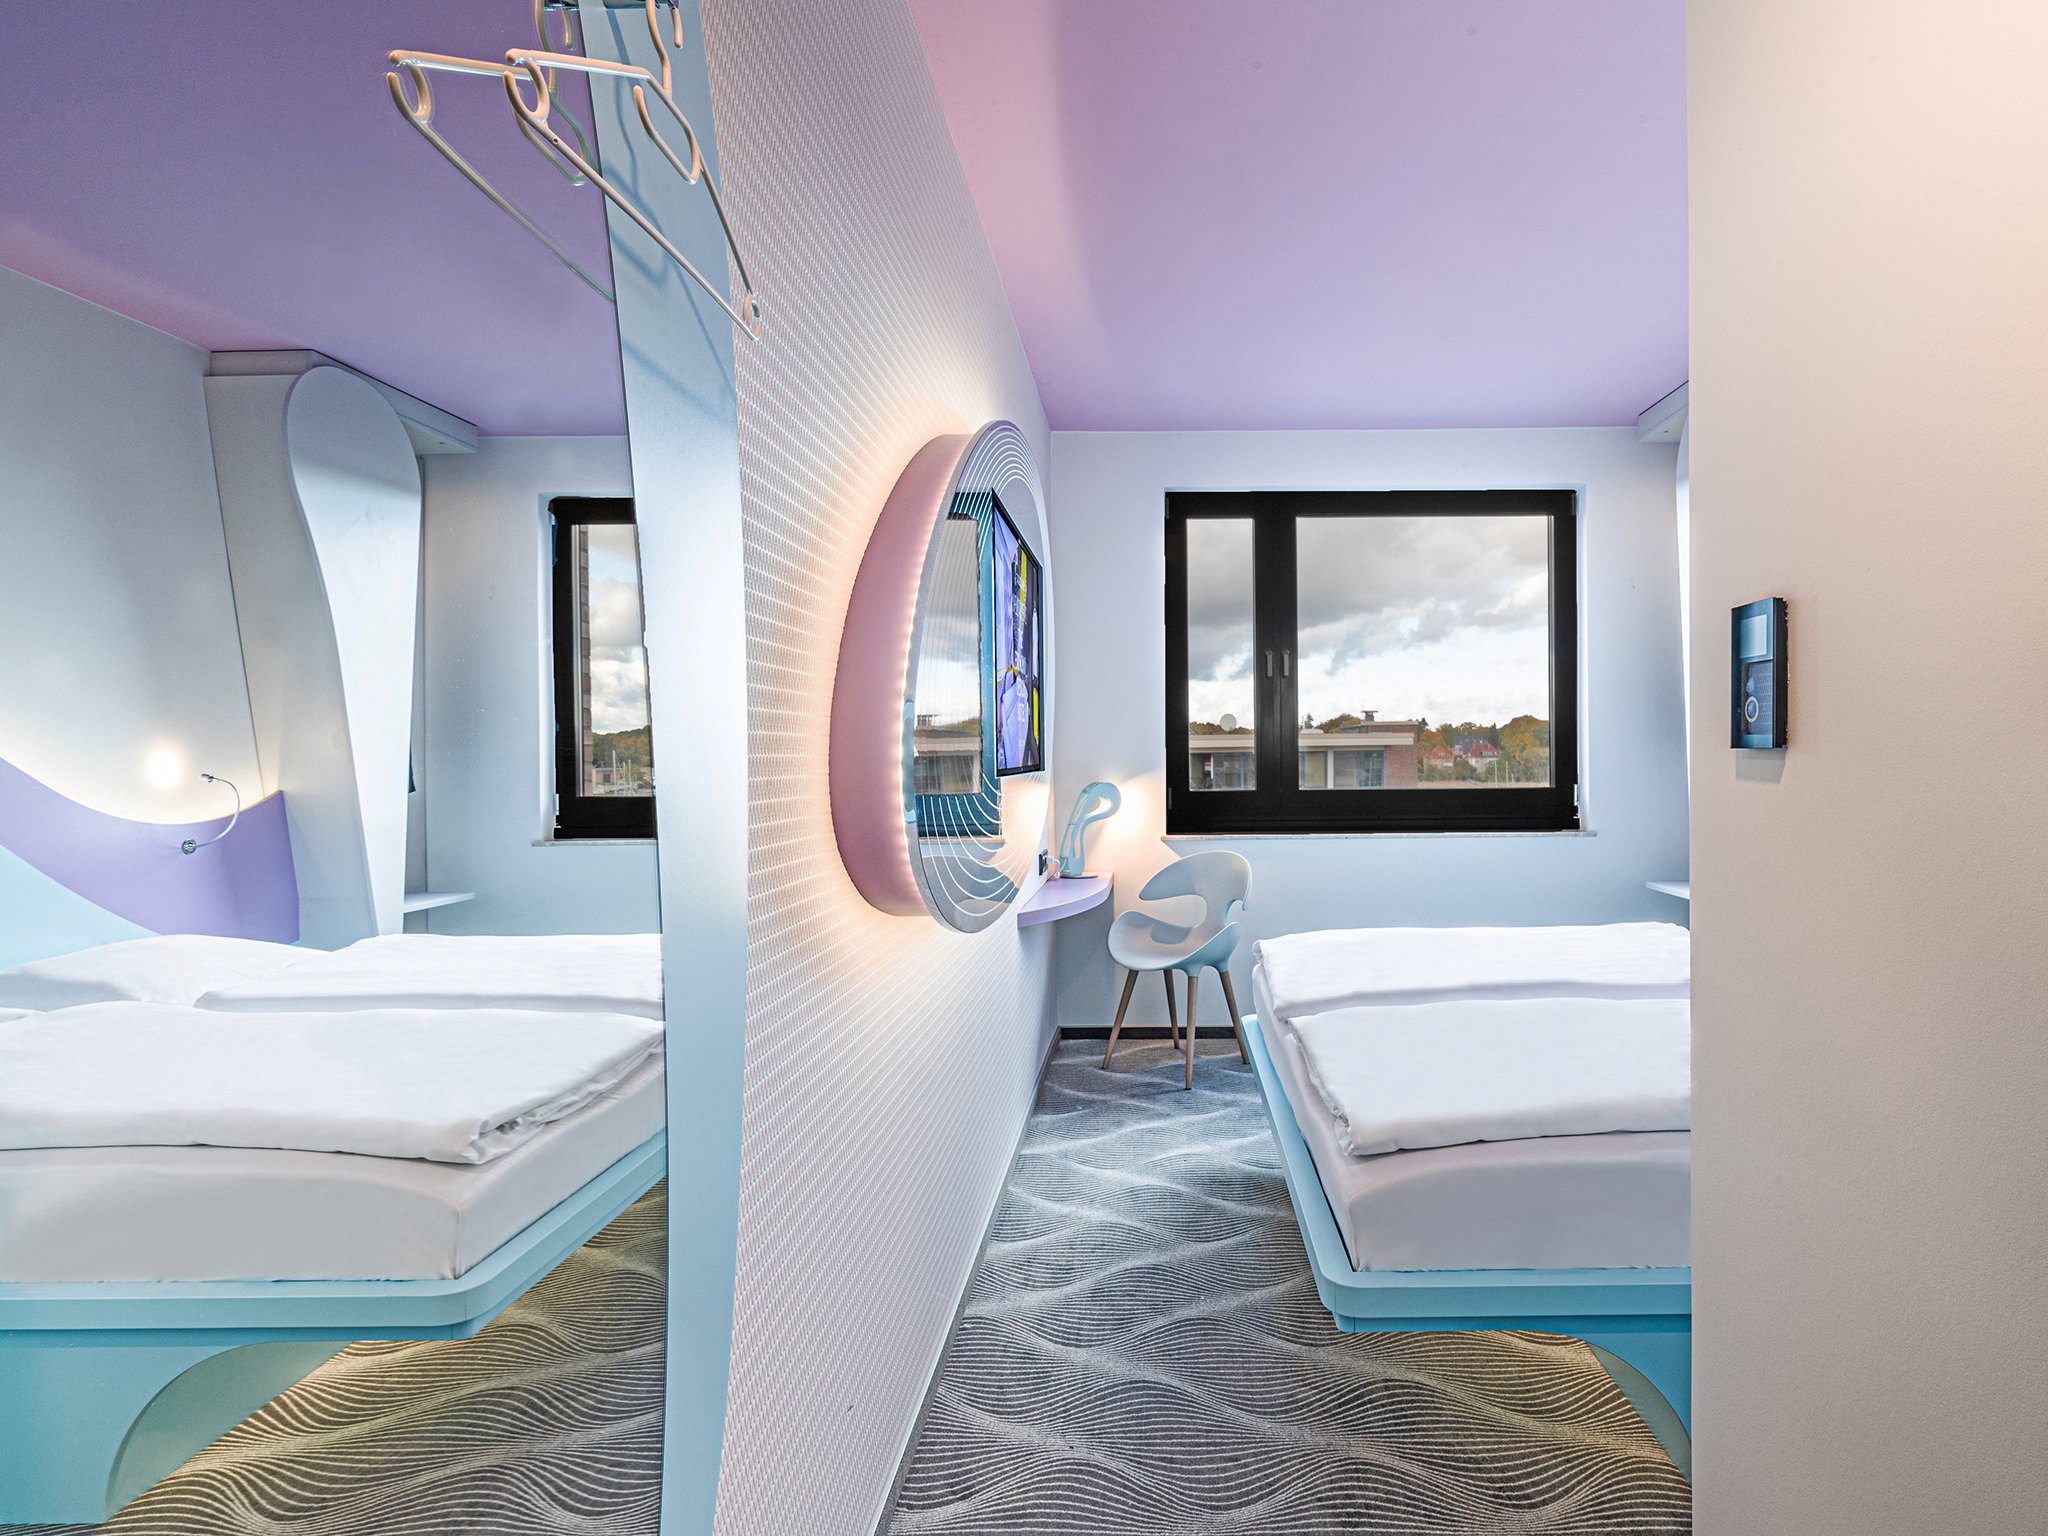 A bright two-room suite of the prizeotel in Rostock with a view of the beds